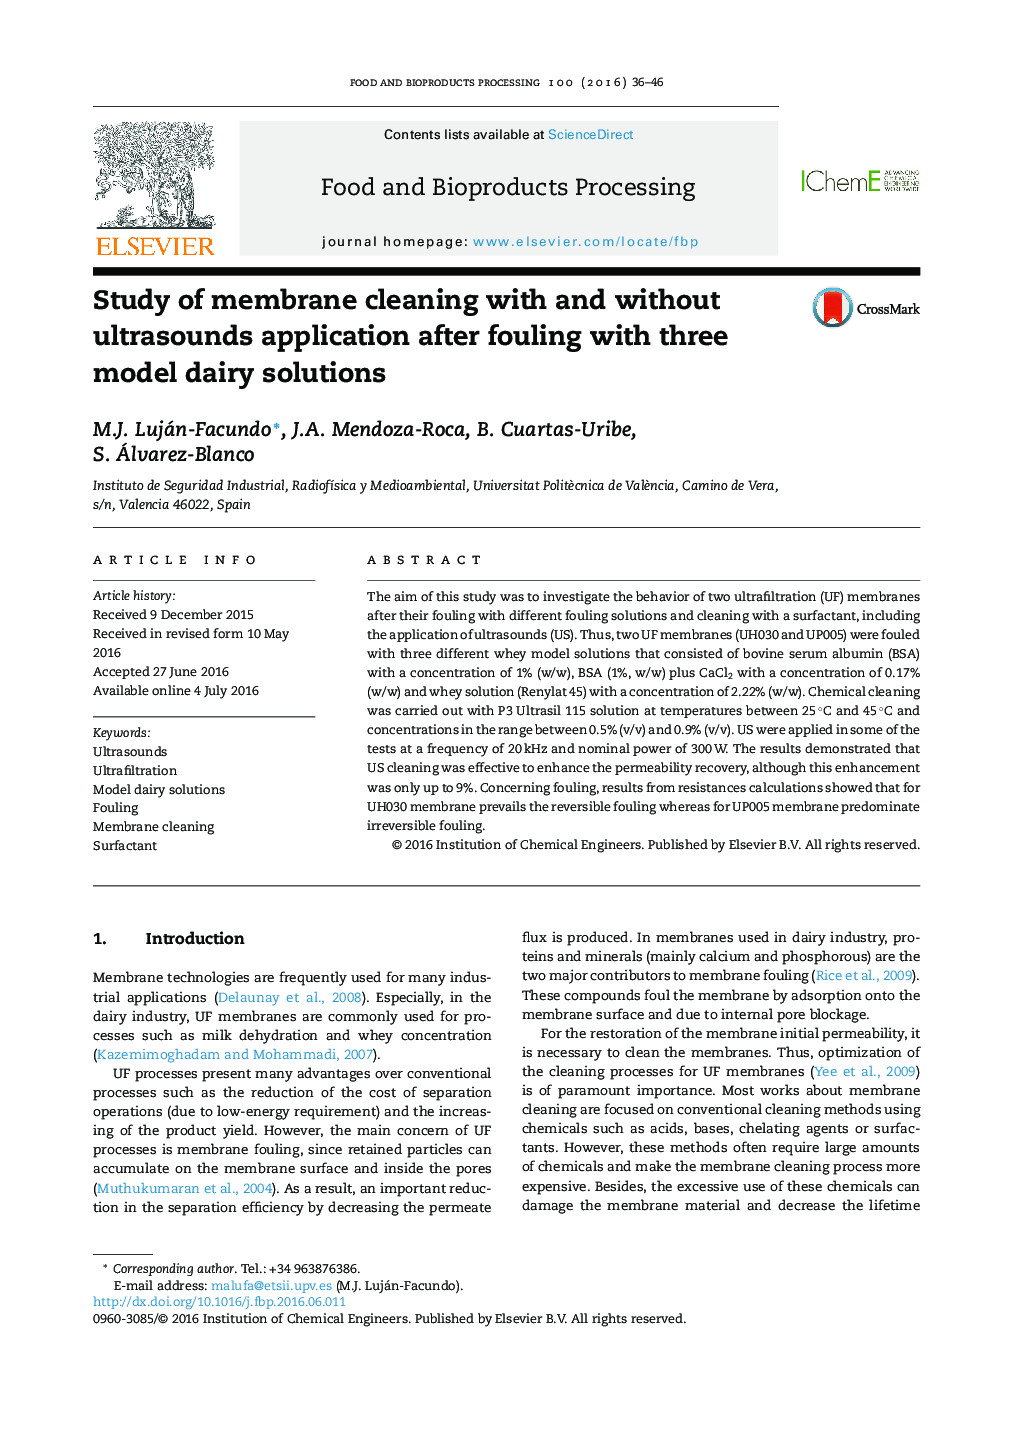 Study of membrane cleaning with and without ultrasounds application after fouling with three model dairy solutions